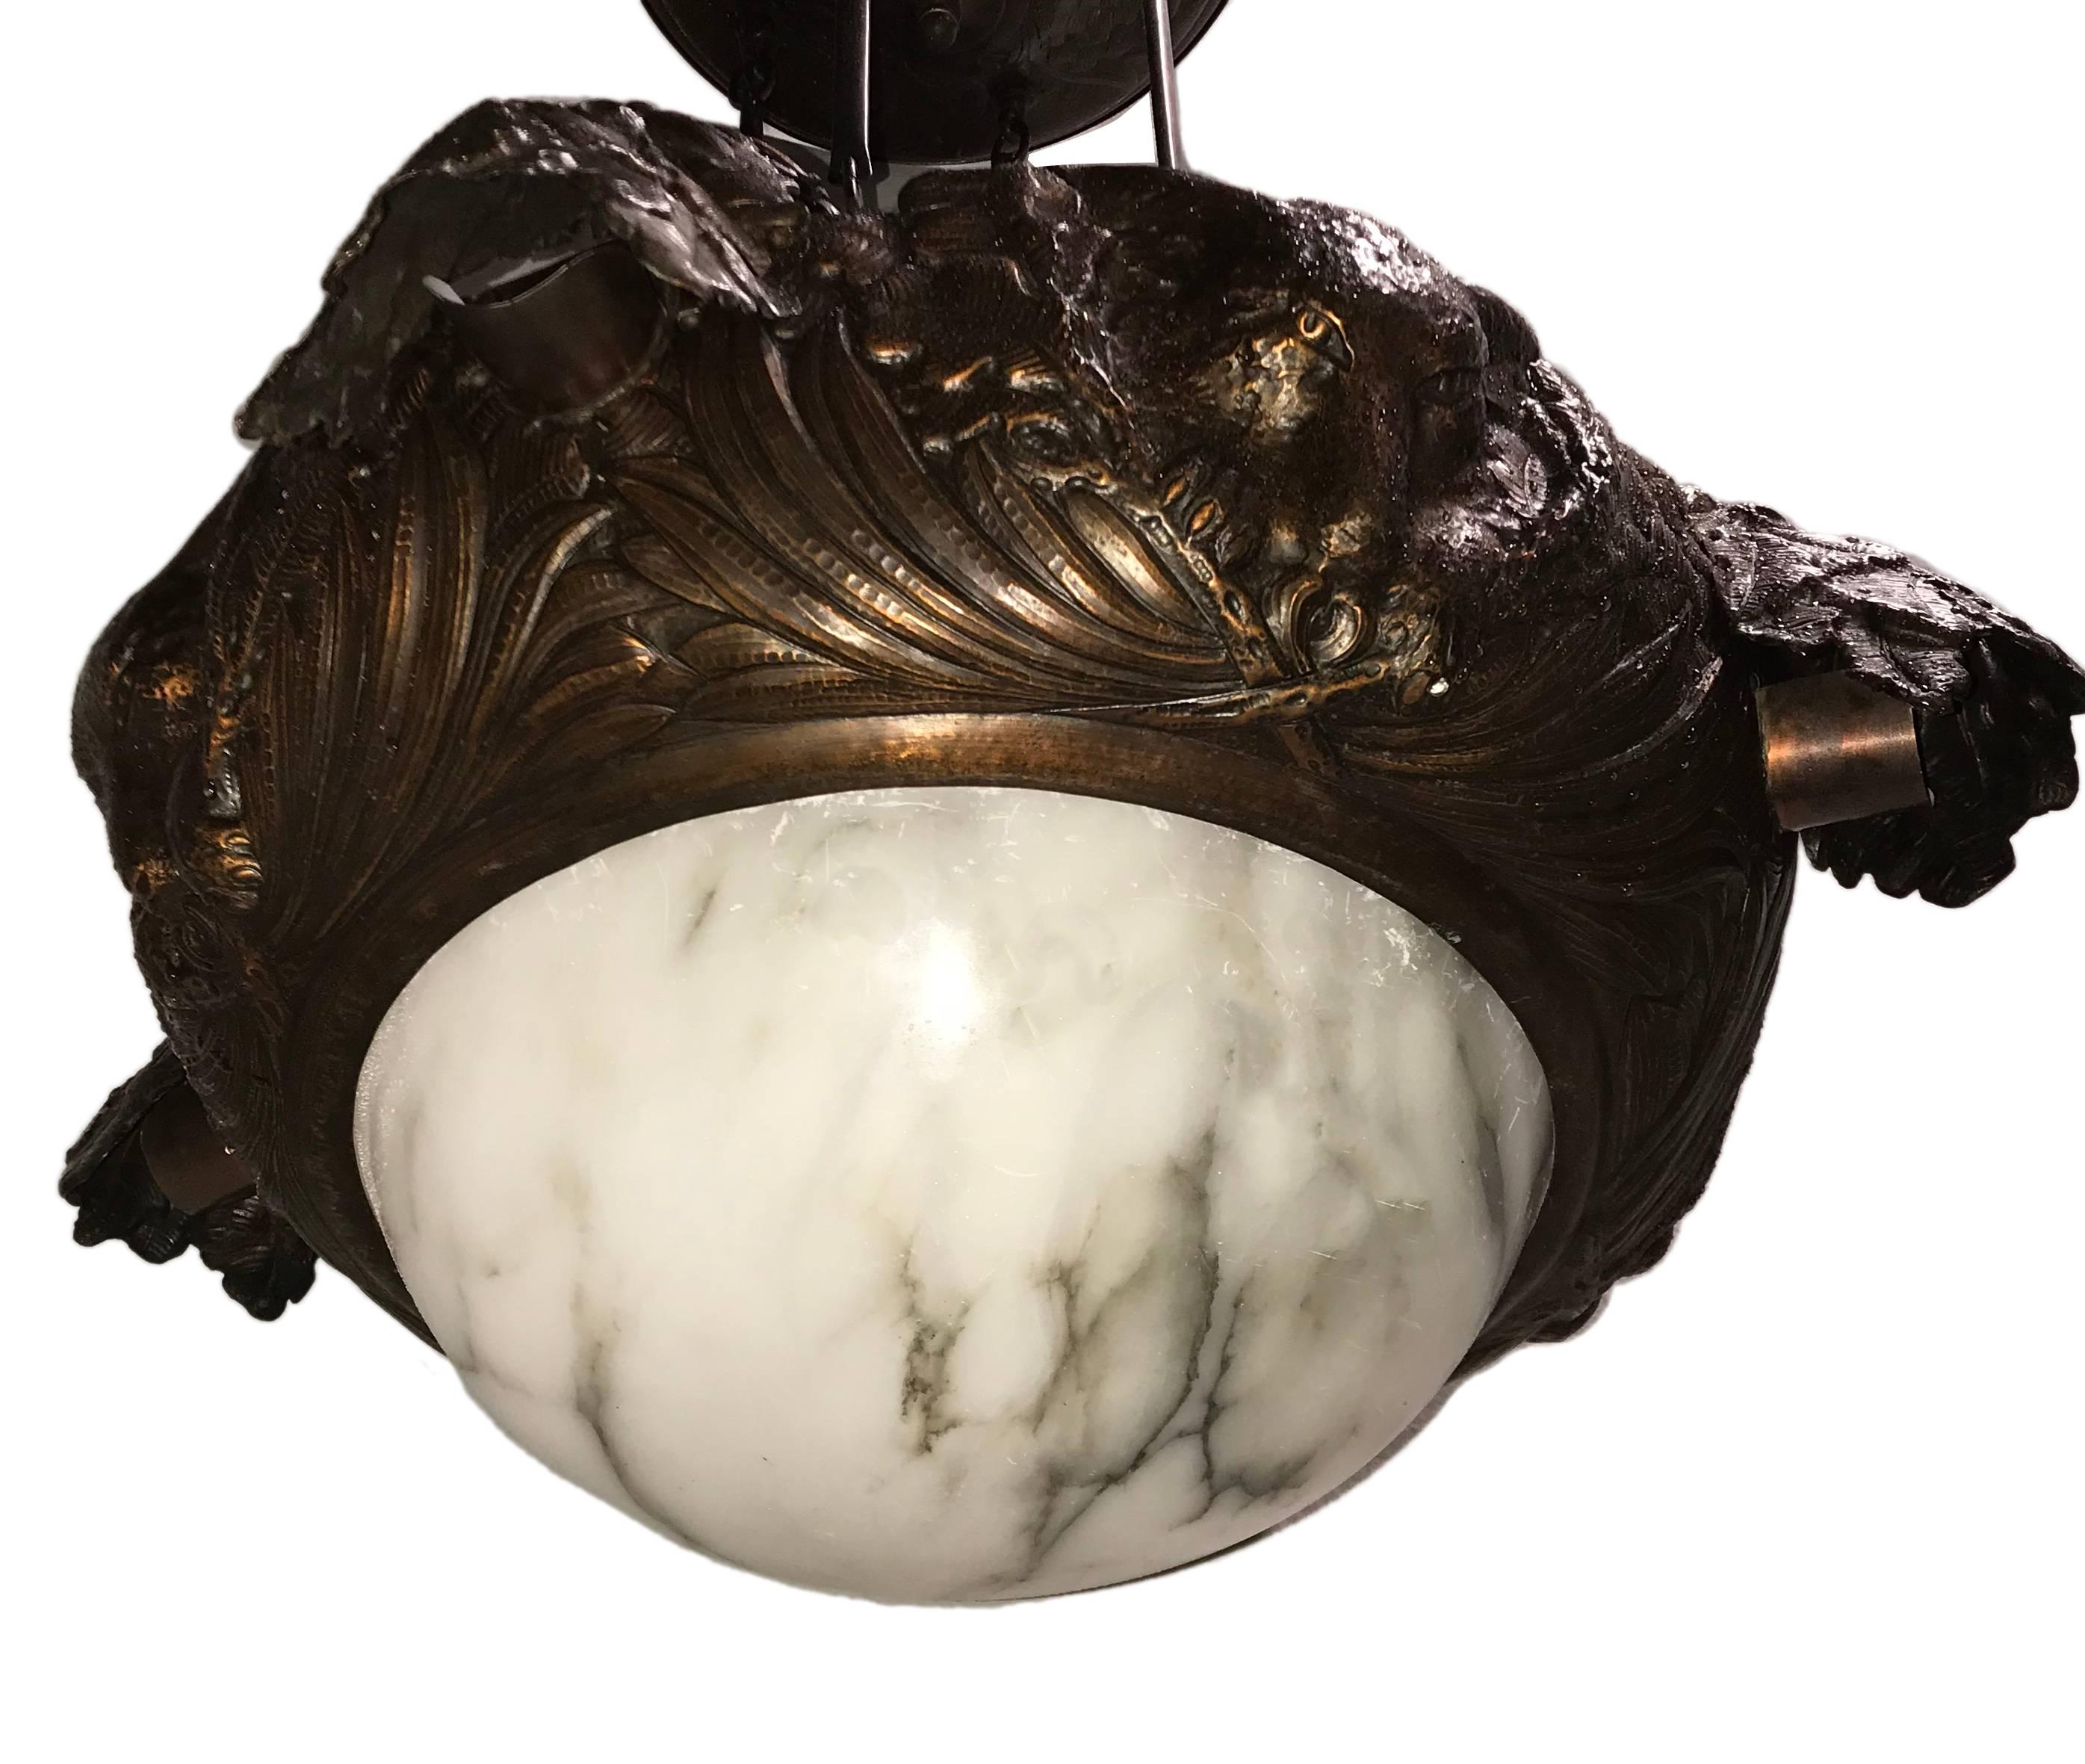 A English hammered copper light fixture with foxes and acorns details, and alabaster inset, circa 1920s.

Measurements:
Diameter 30